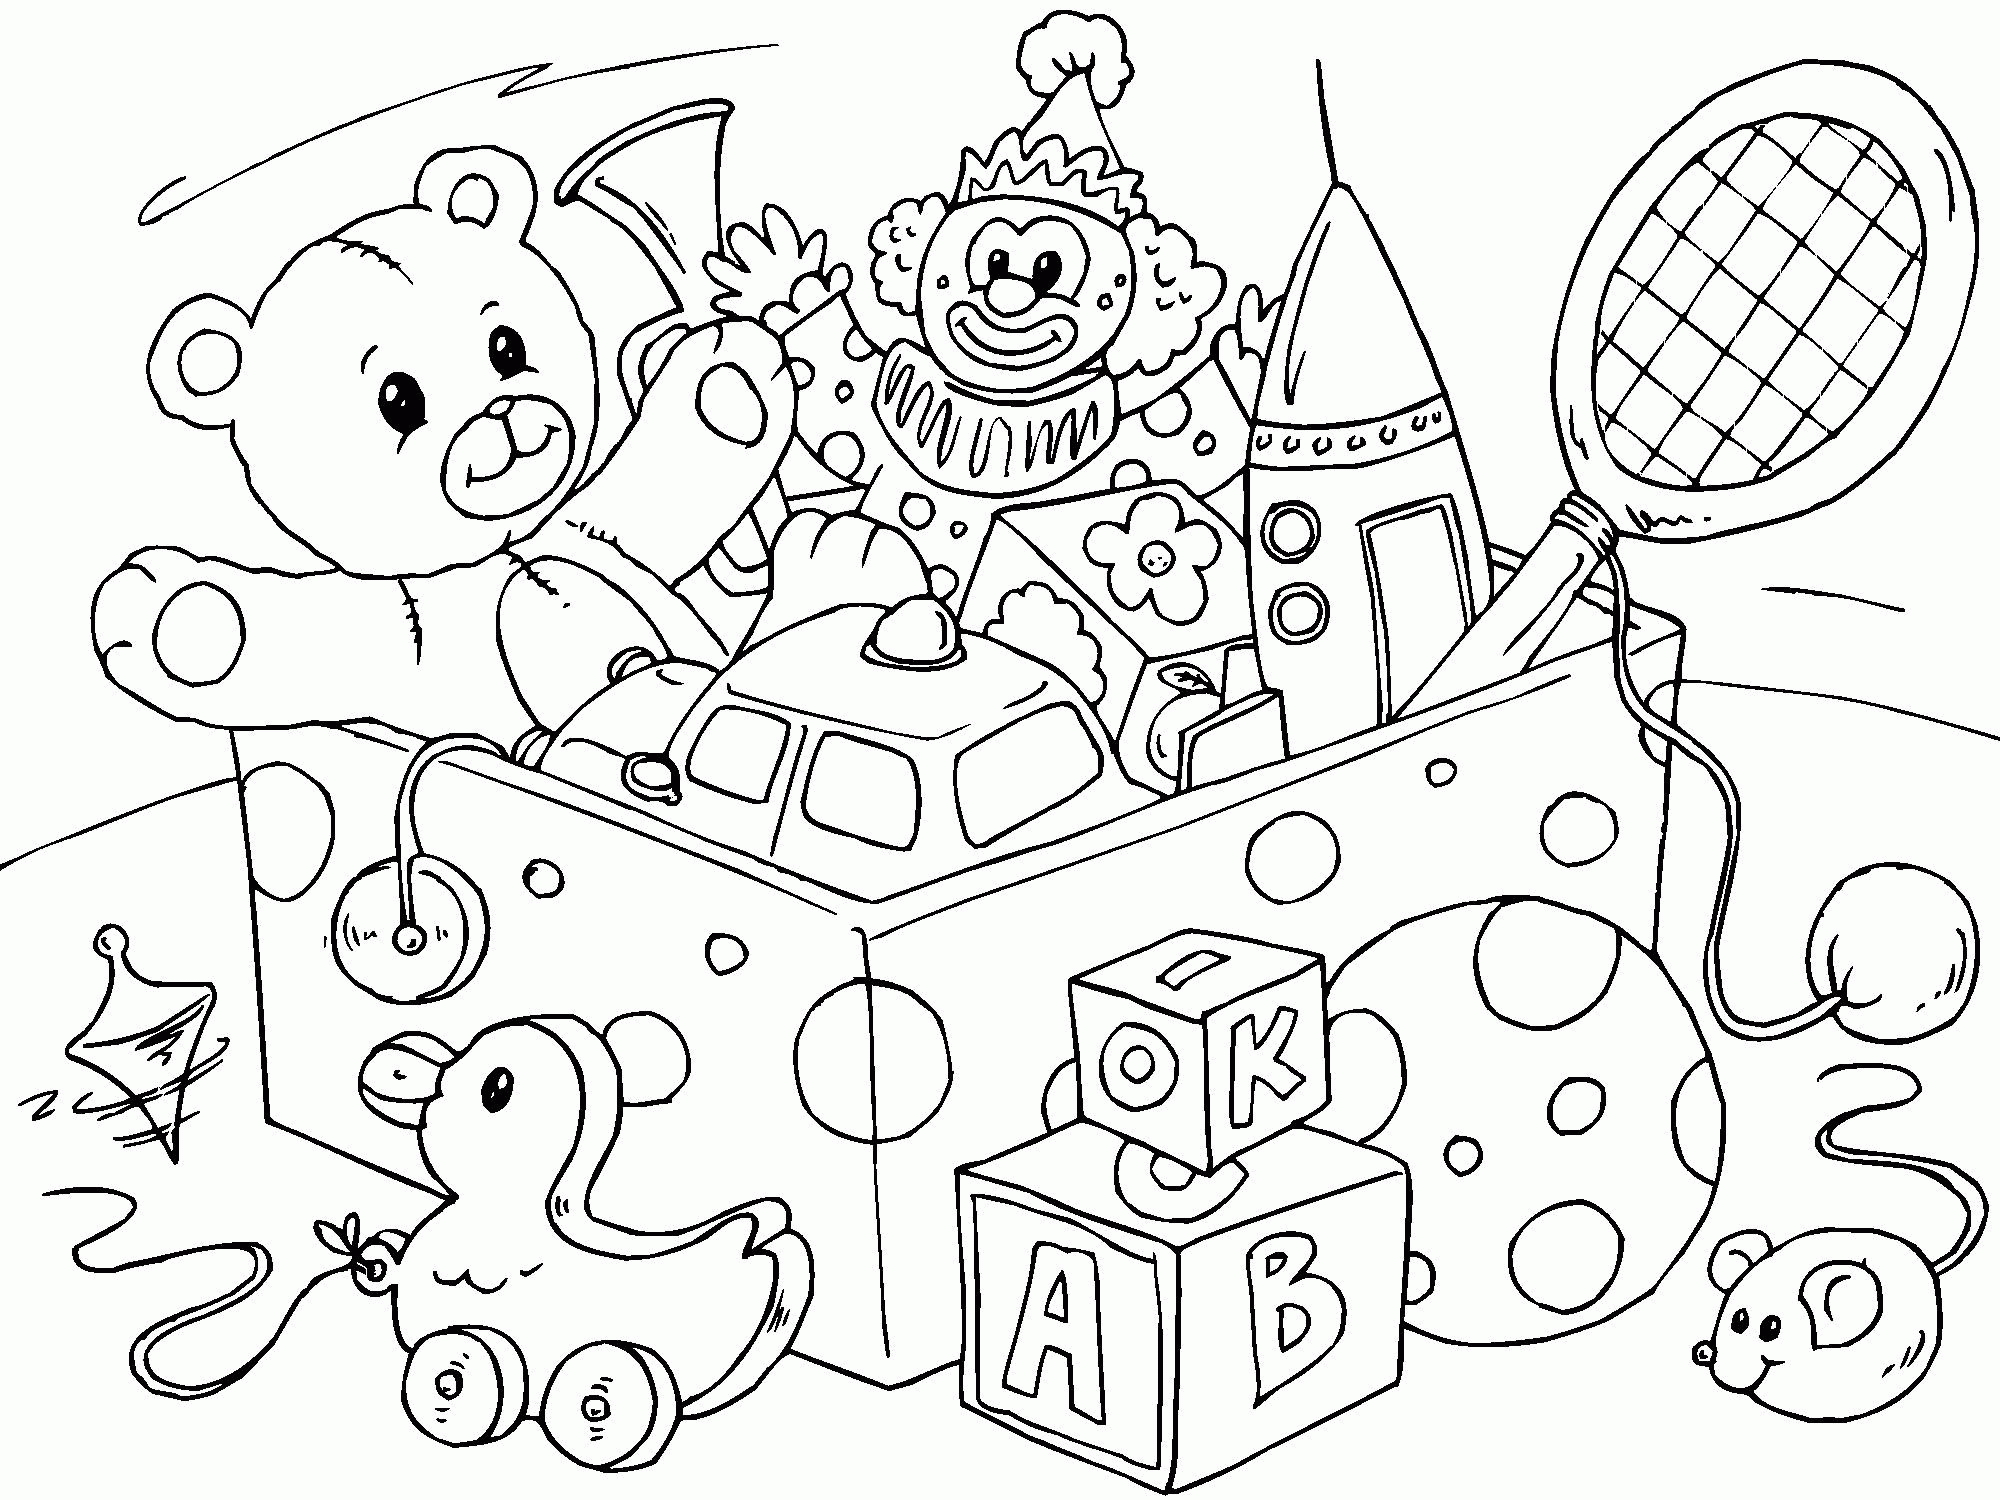 Coloring page toys - img 22821.